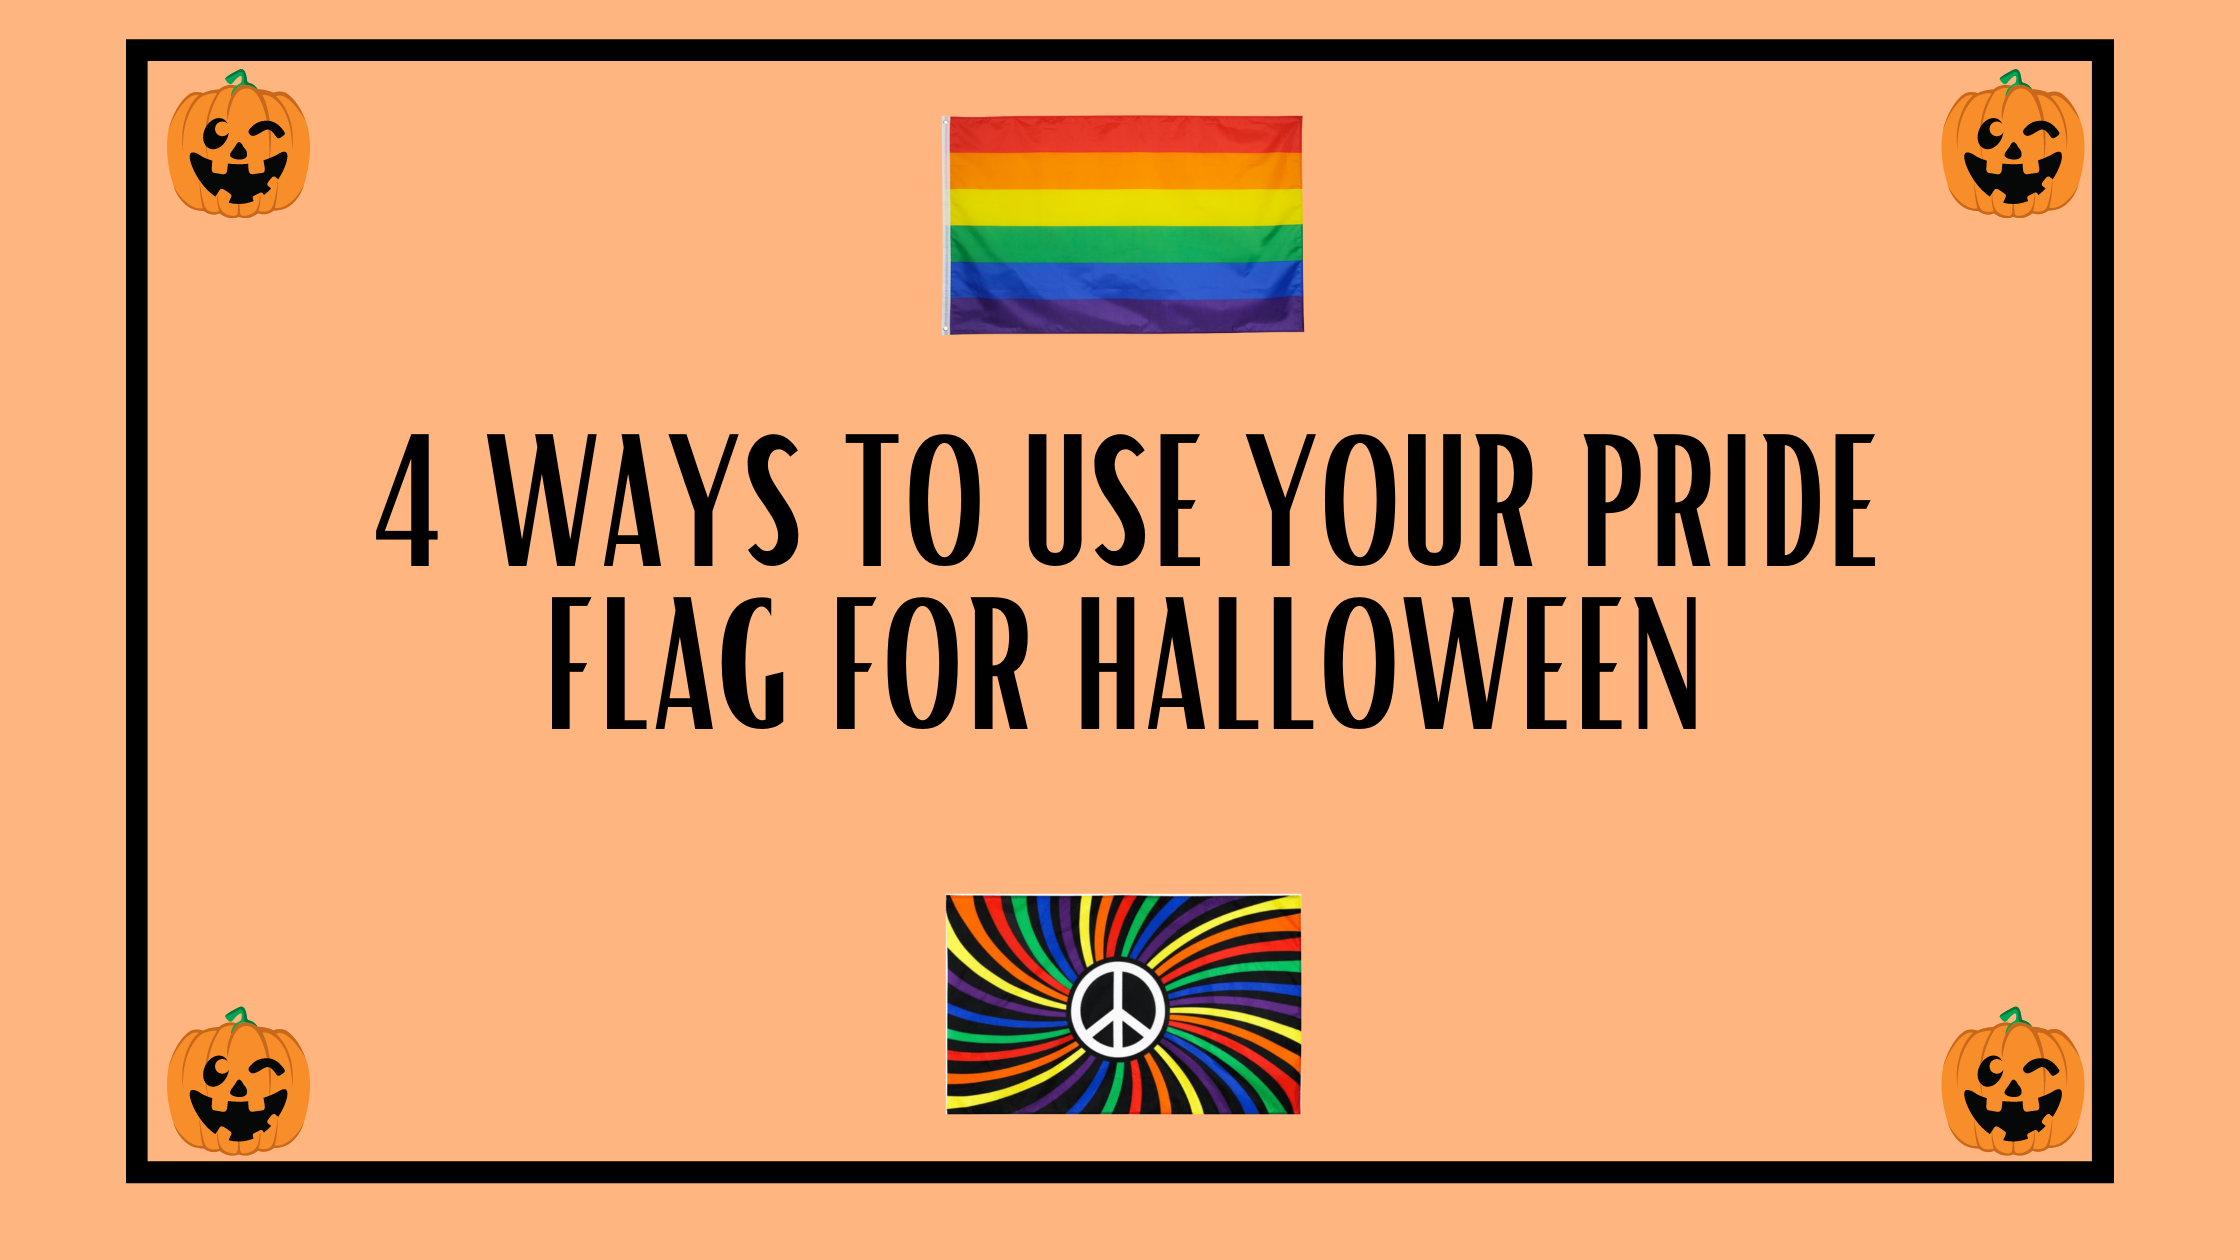 4 Ways to Use Your Pride Flag for Halloween